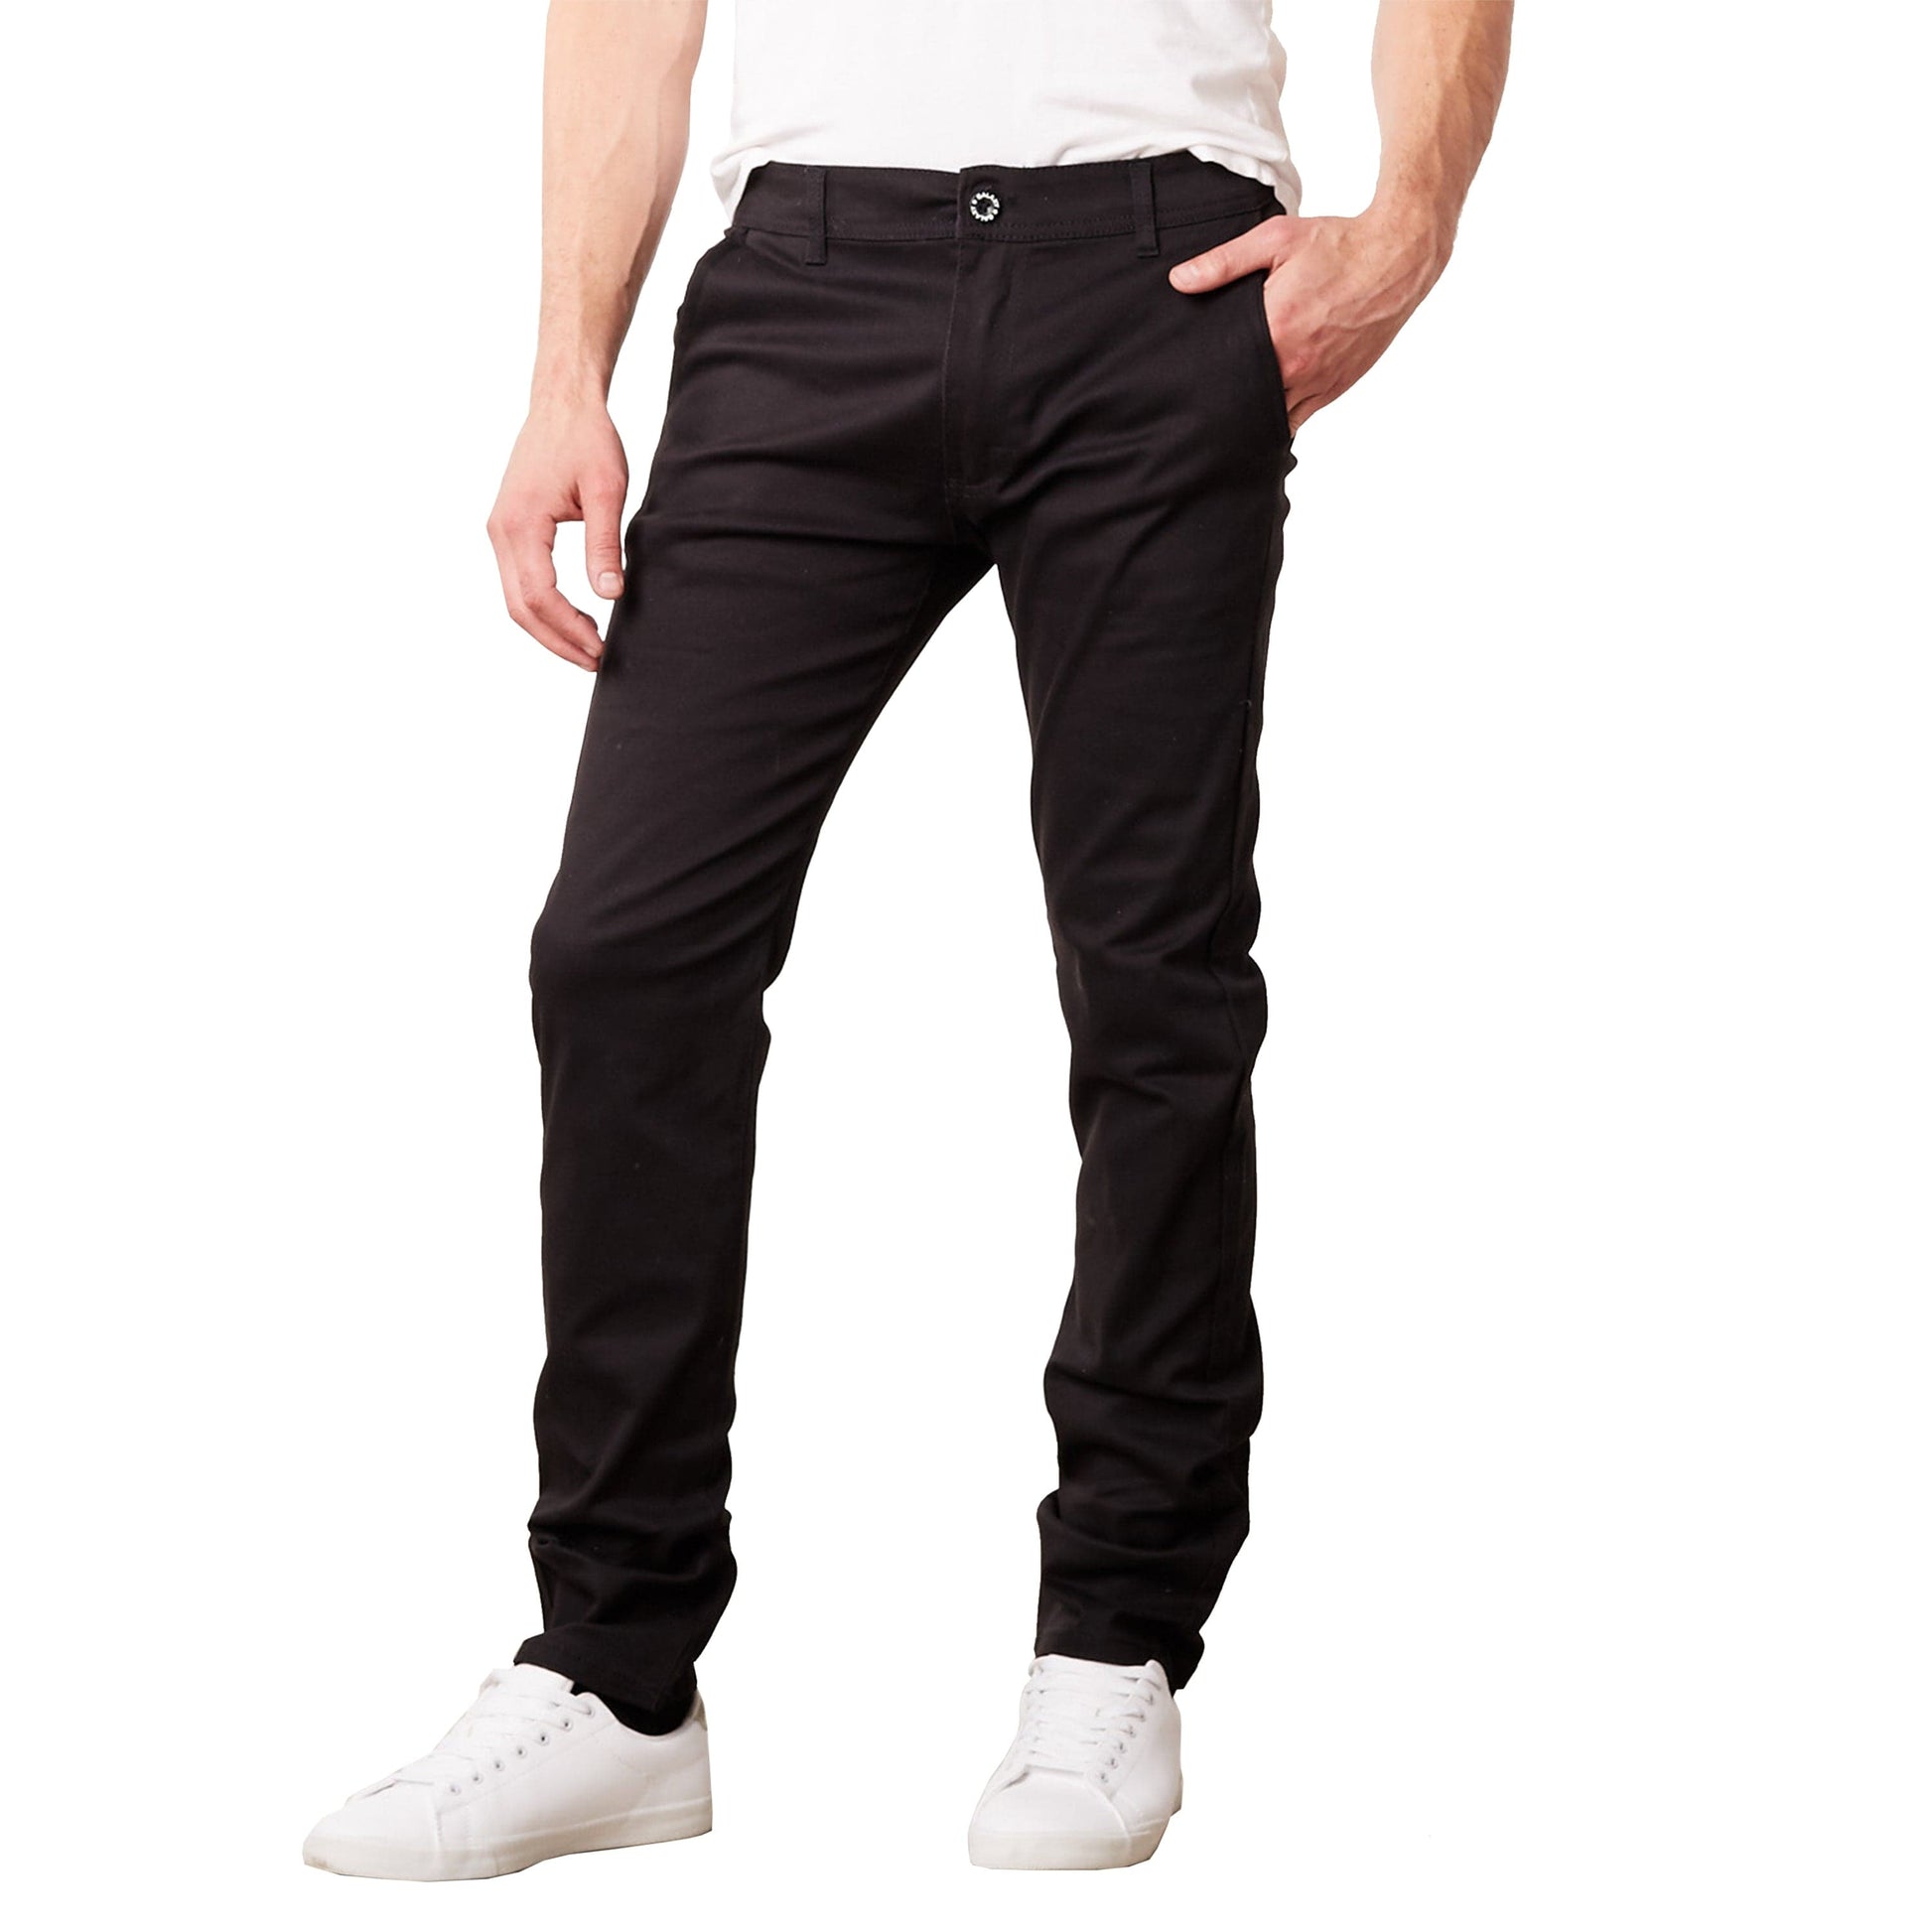 Mens Slim Fit Cotton Stretch Chino Pants (3-Pack) 